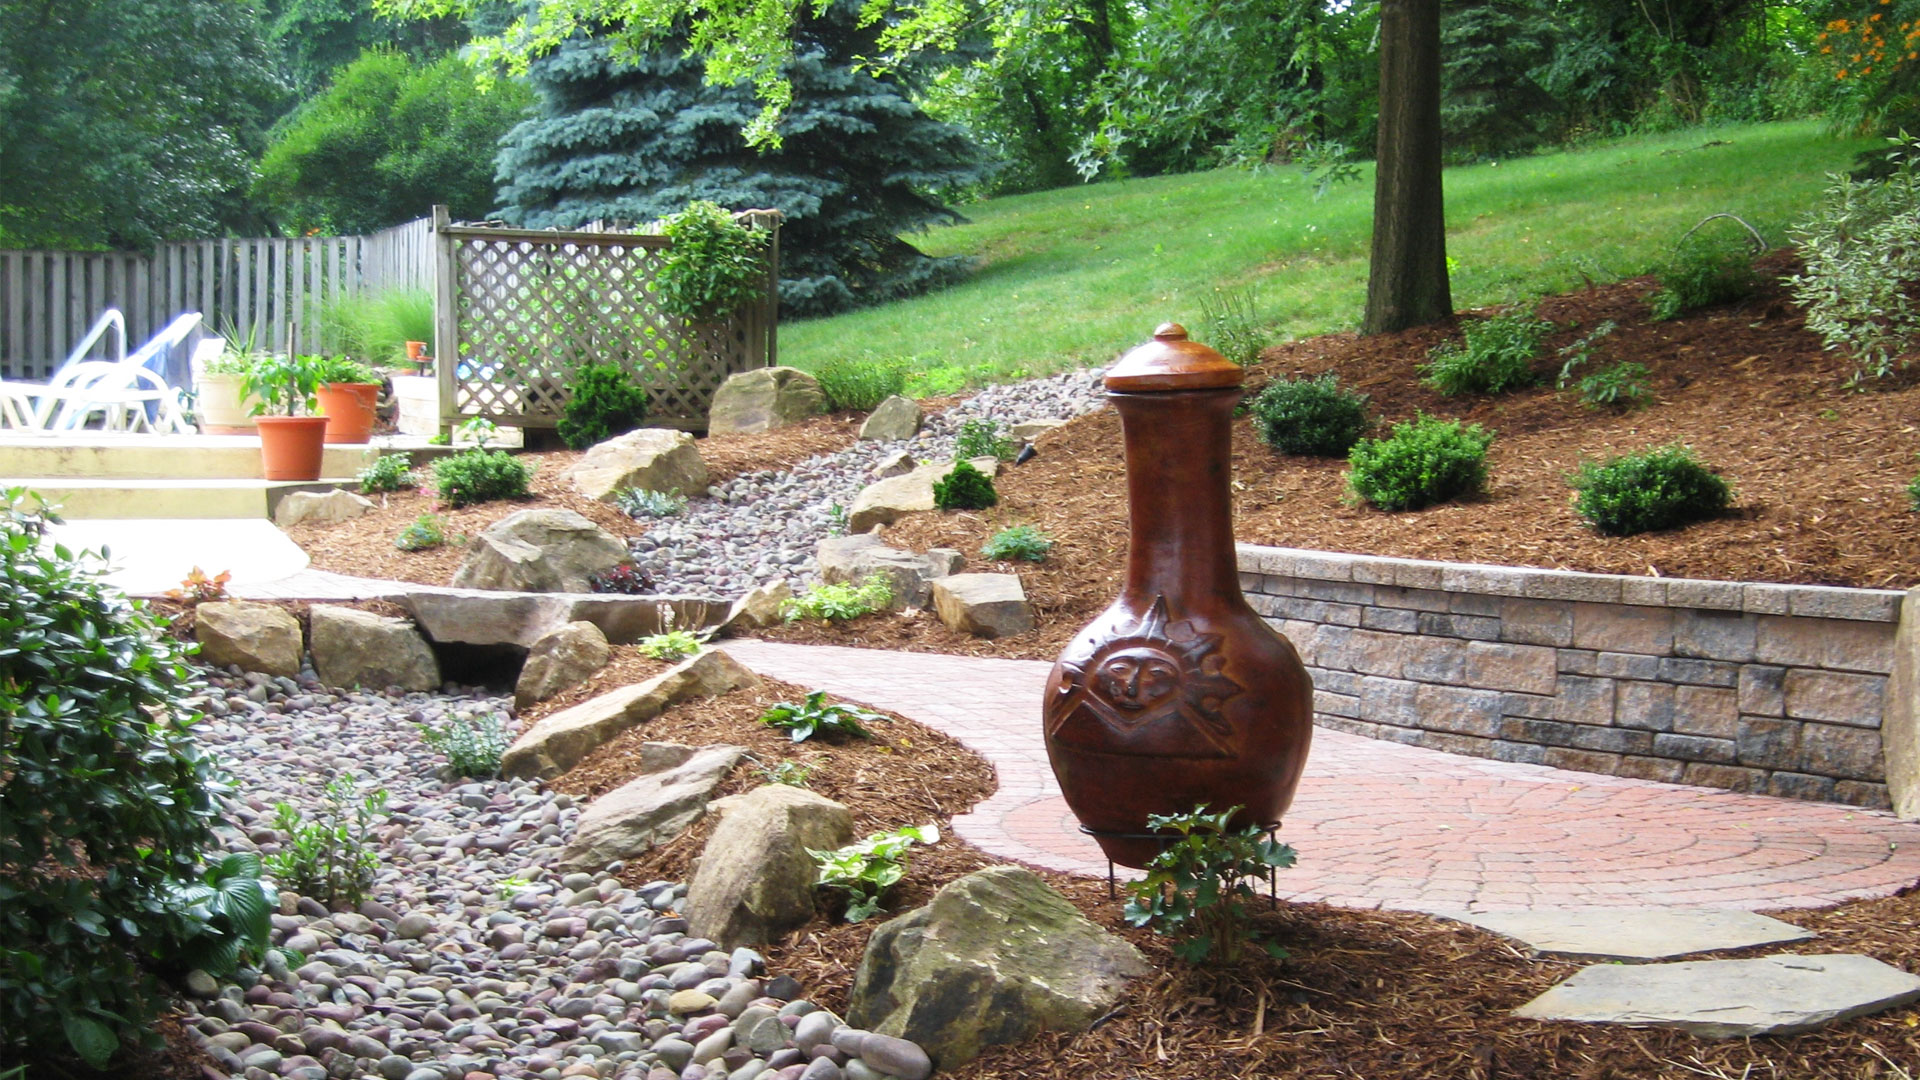 Patio with chiminea, natural stone, and hillside planting